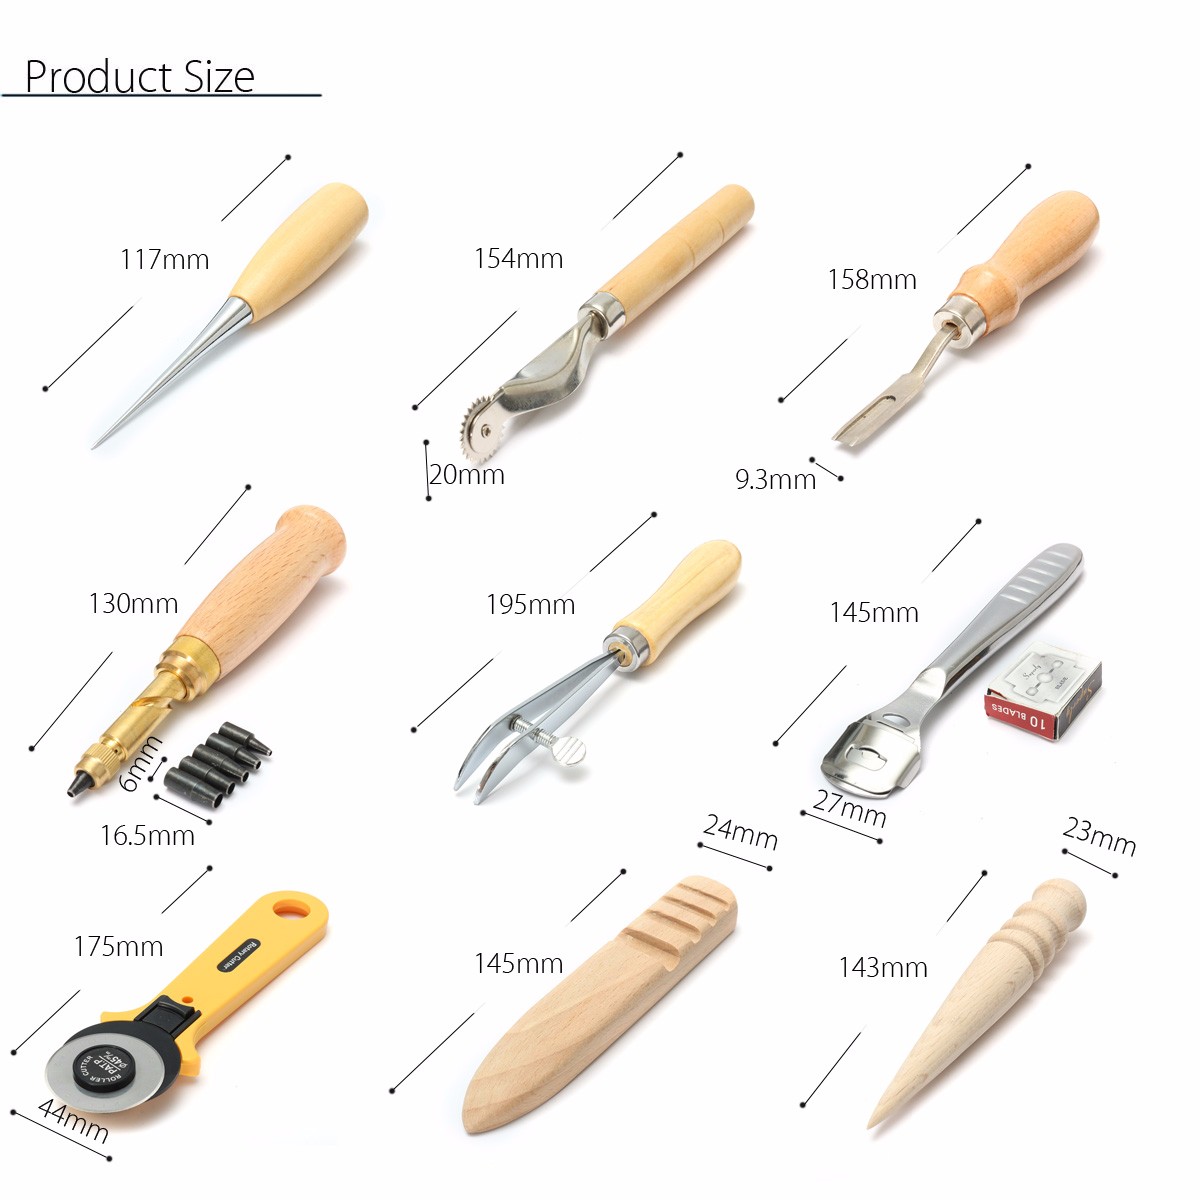 24pcs-Leather-Craft-Punch-Tools-Kit-Hand-Sewing-Stitching-Carving-Work-Saddle-Groover-1104764